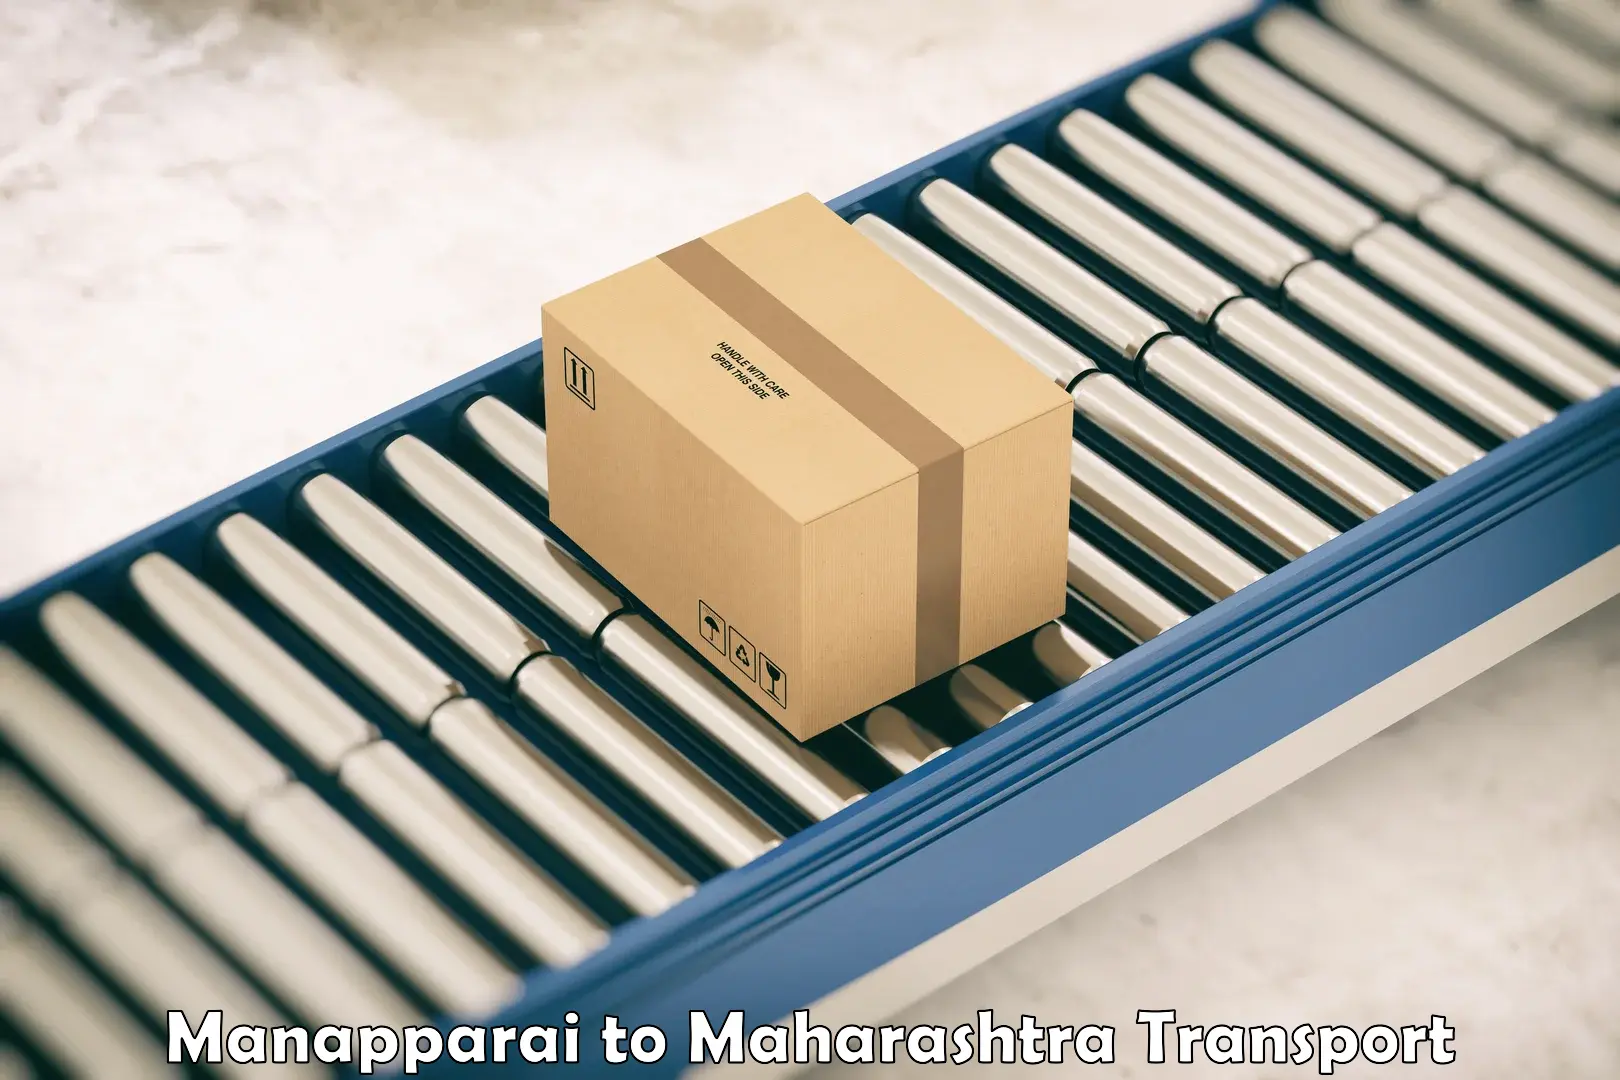 Furniture transport service in Manapparai to Mahad